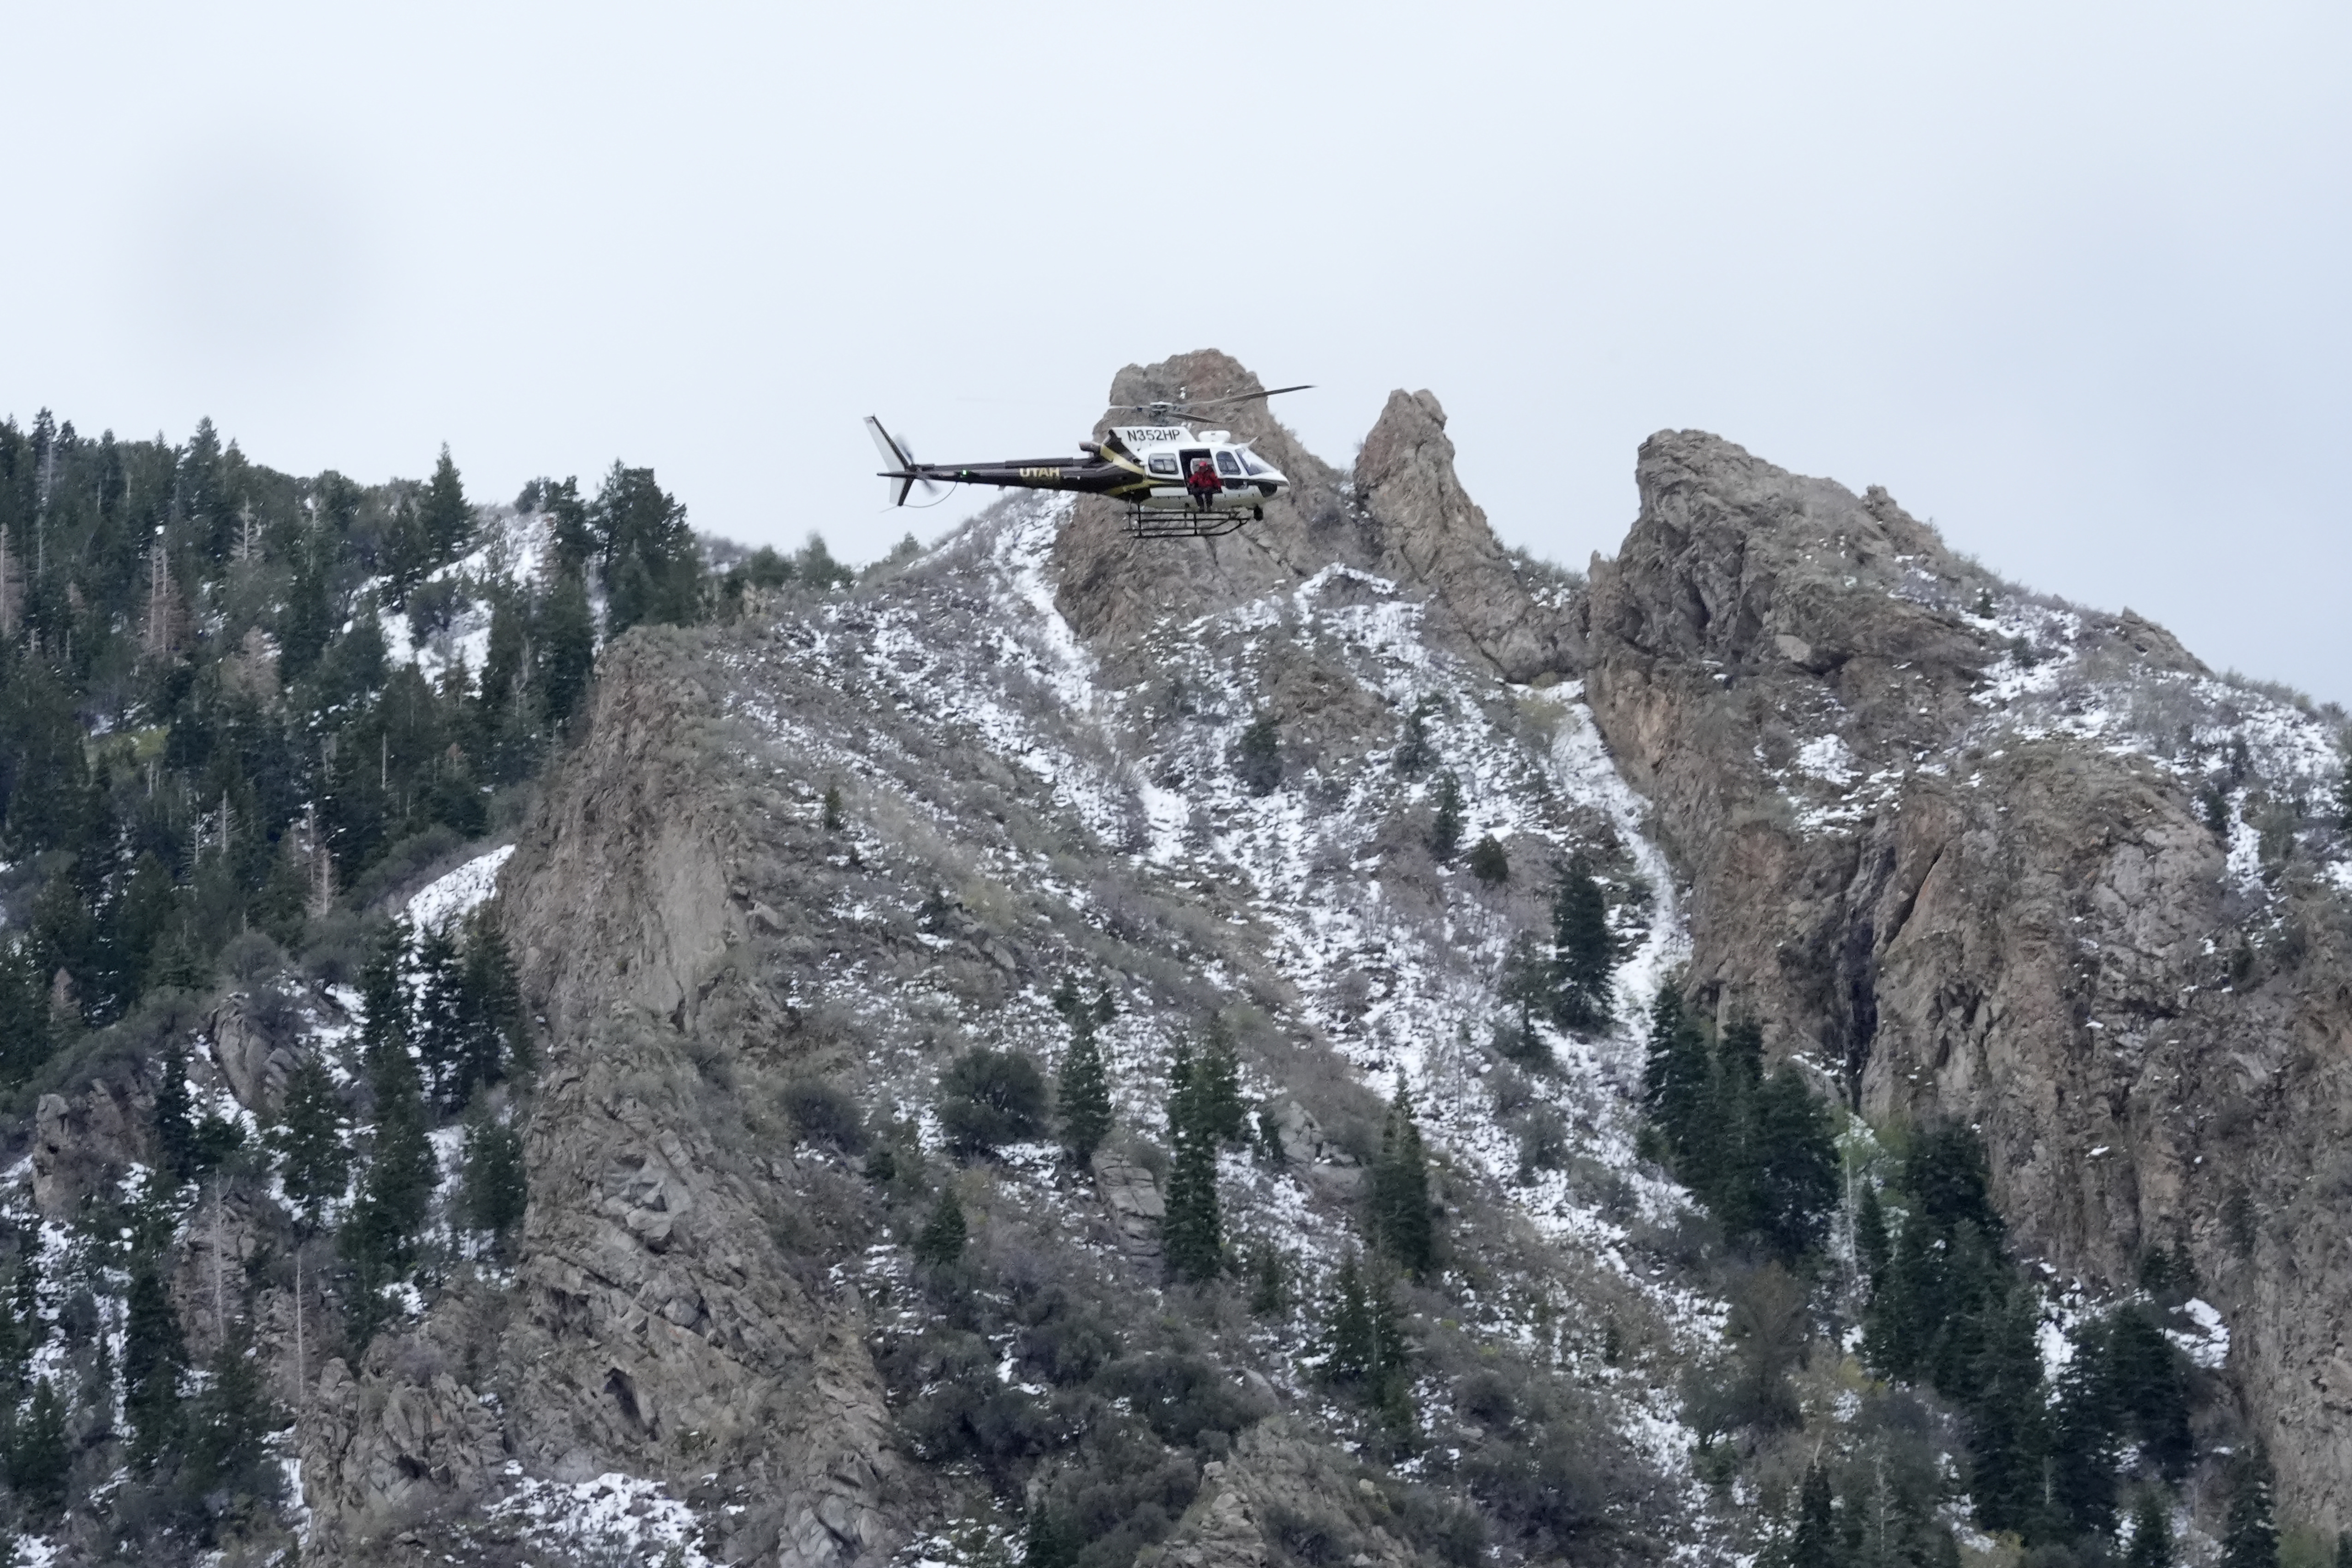 Two skiers killed in Utah avalanche after days of snowstorms